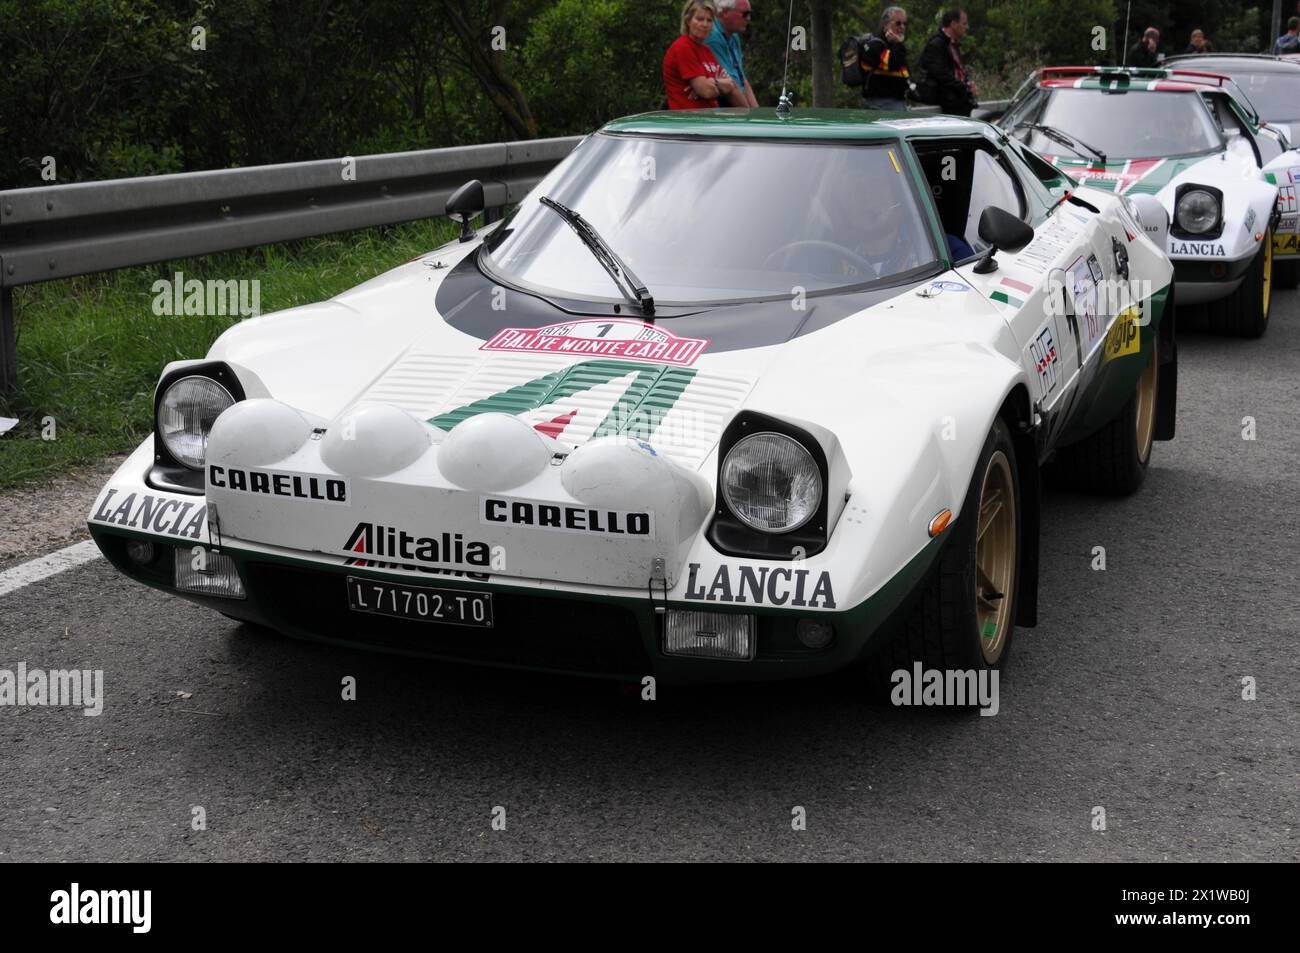 A white Lancia Stratos racing car with green stripes and red accents ready for a rally, SOLITUDE REVIVAL 2011, Stuttgart, Baden-Wuerttemberg, Germany Stock Photo